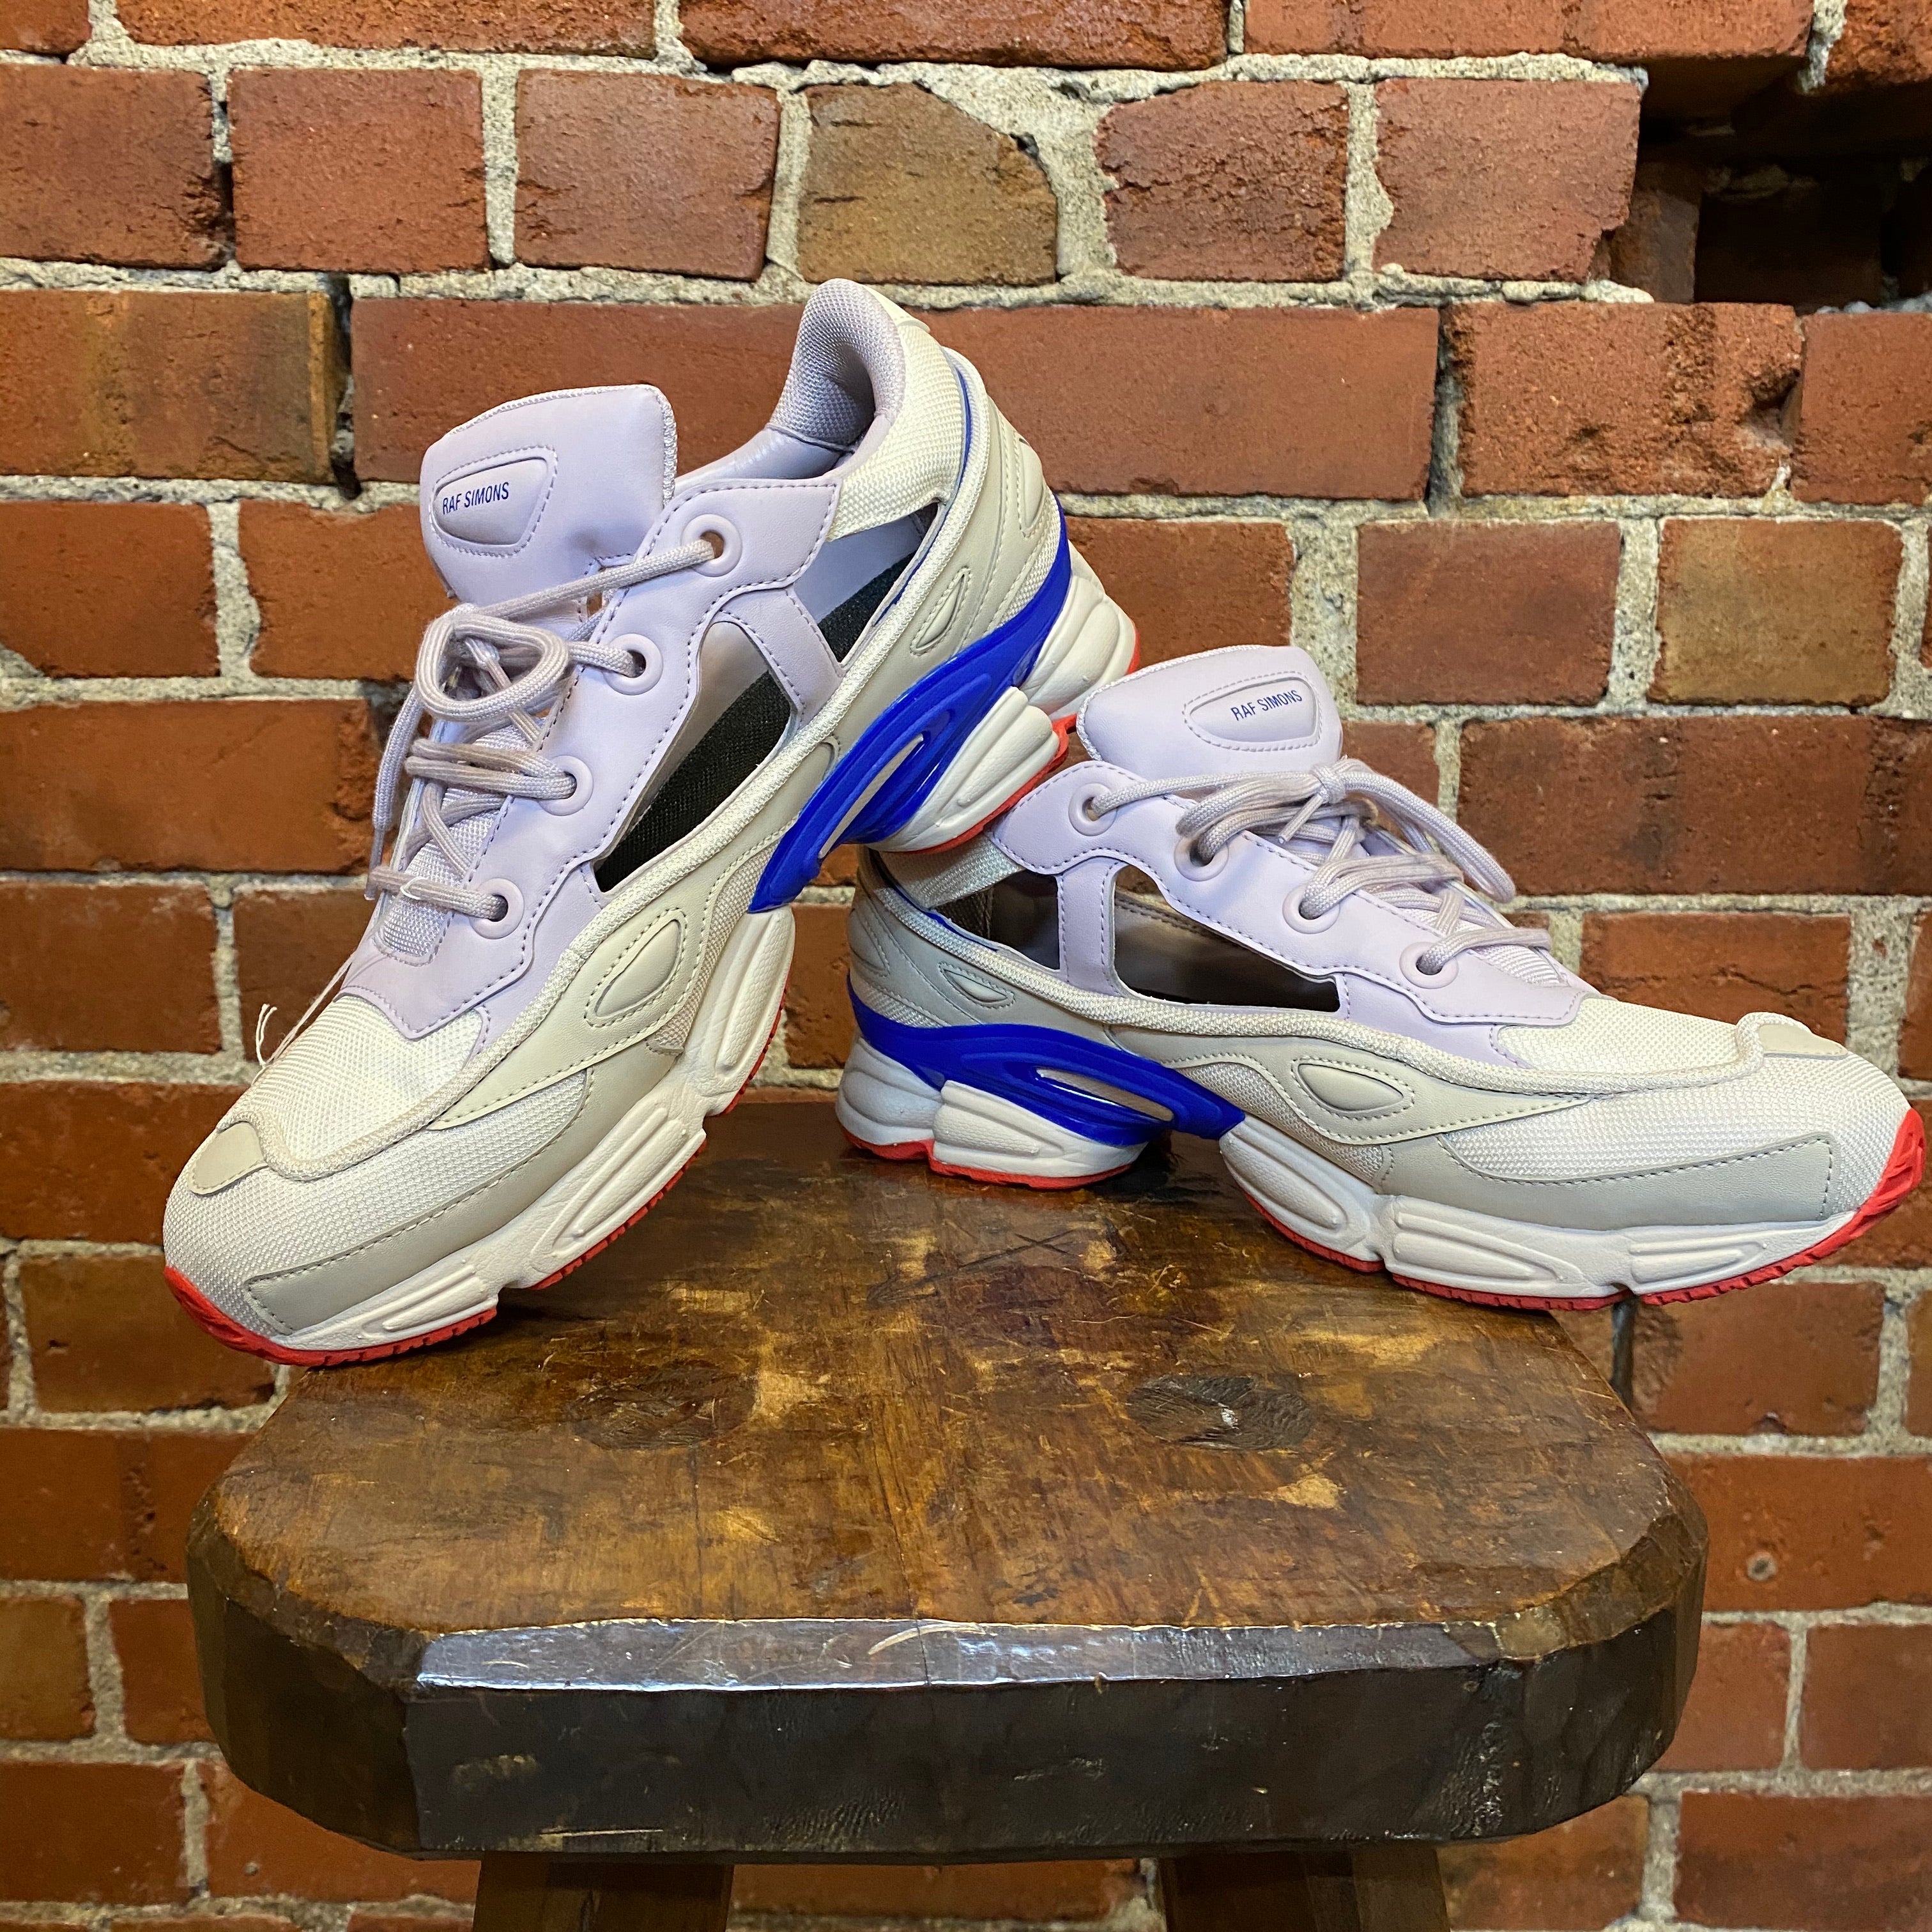 RAF SIMONS ADIDAS RS REPLICANT OZWEEGO CUT OUT SNEAKERS